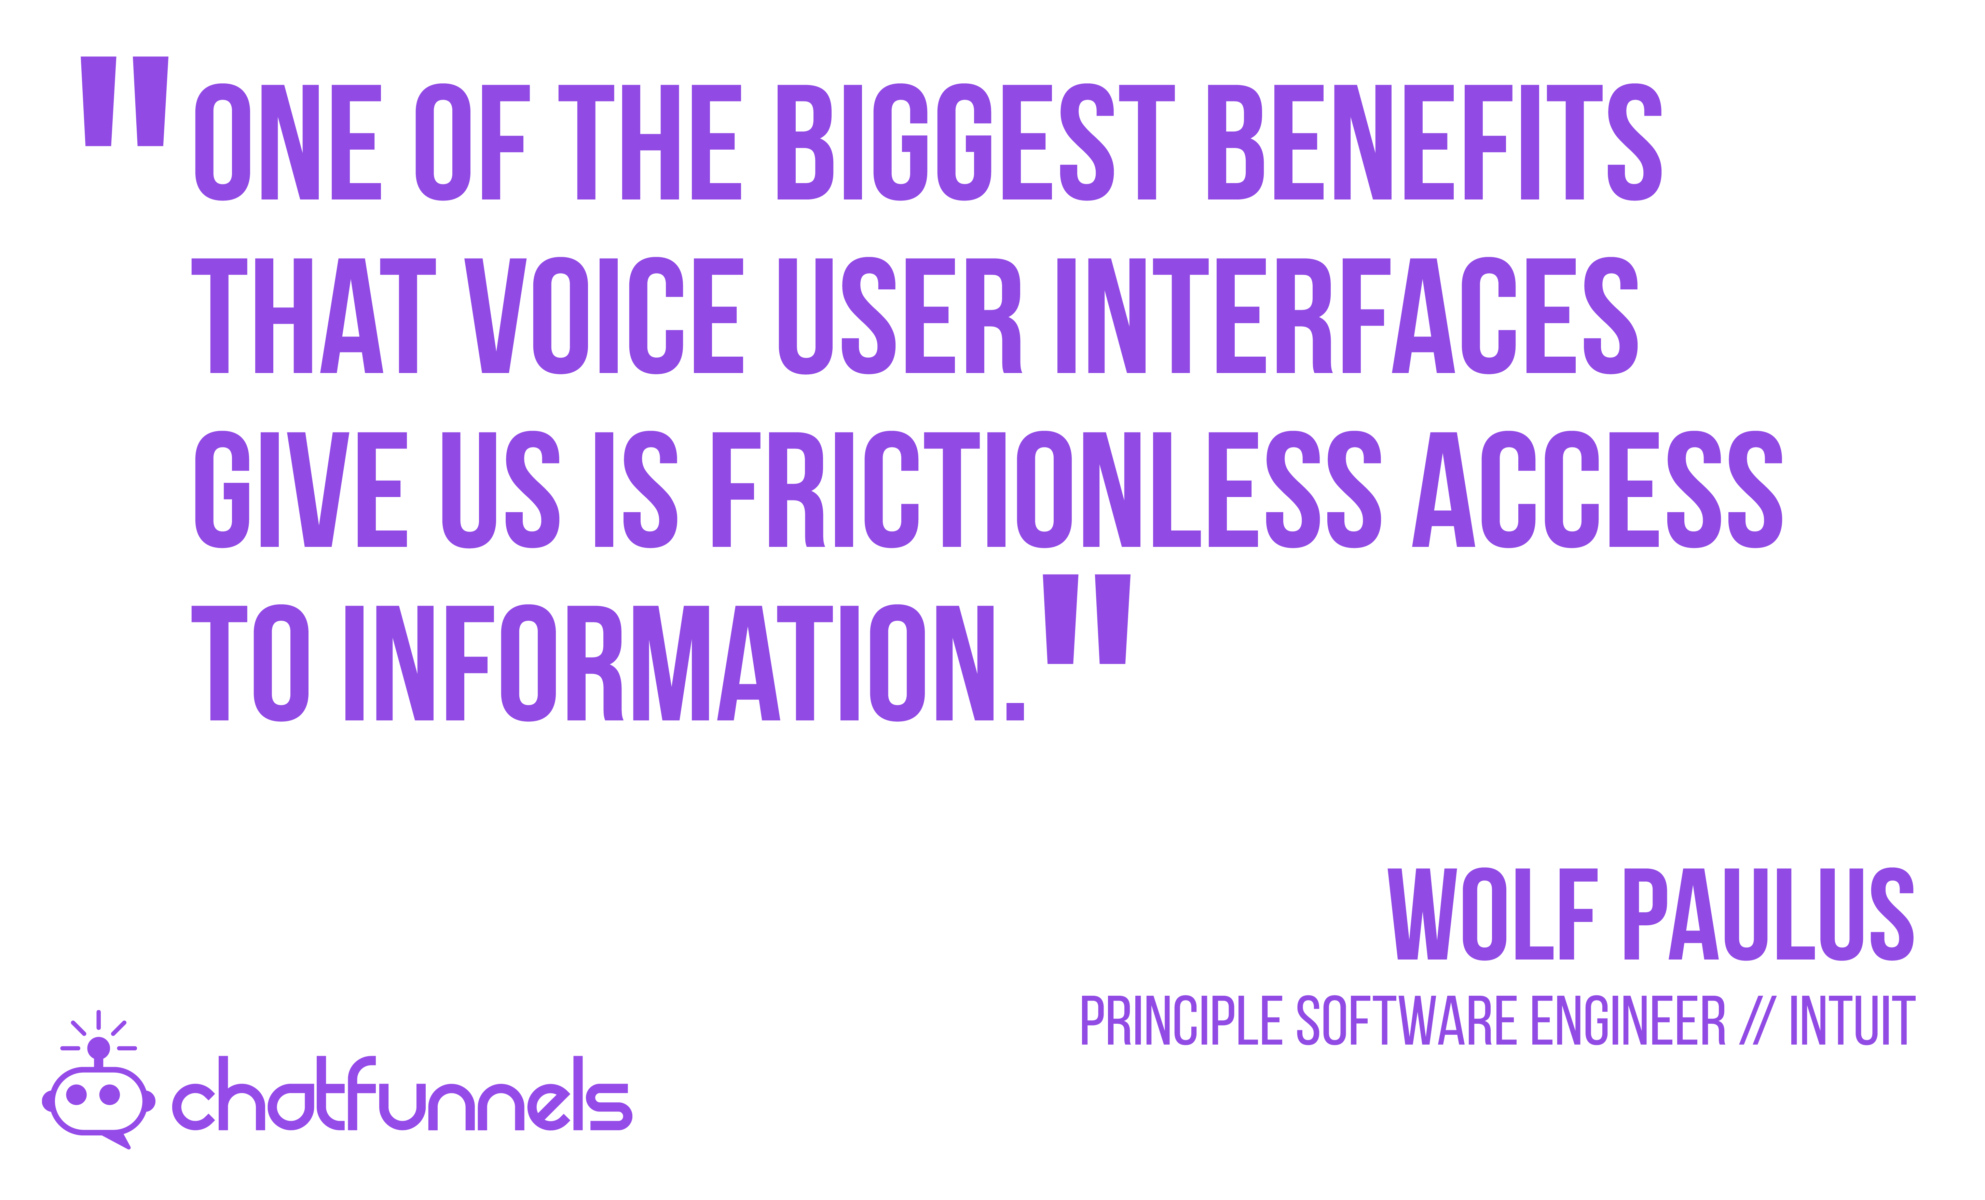 One of the biggest benefits that voice user interfaces give us is frictionless access to information